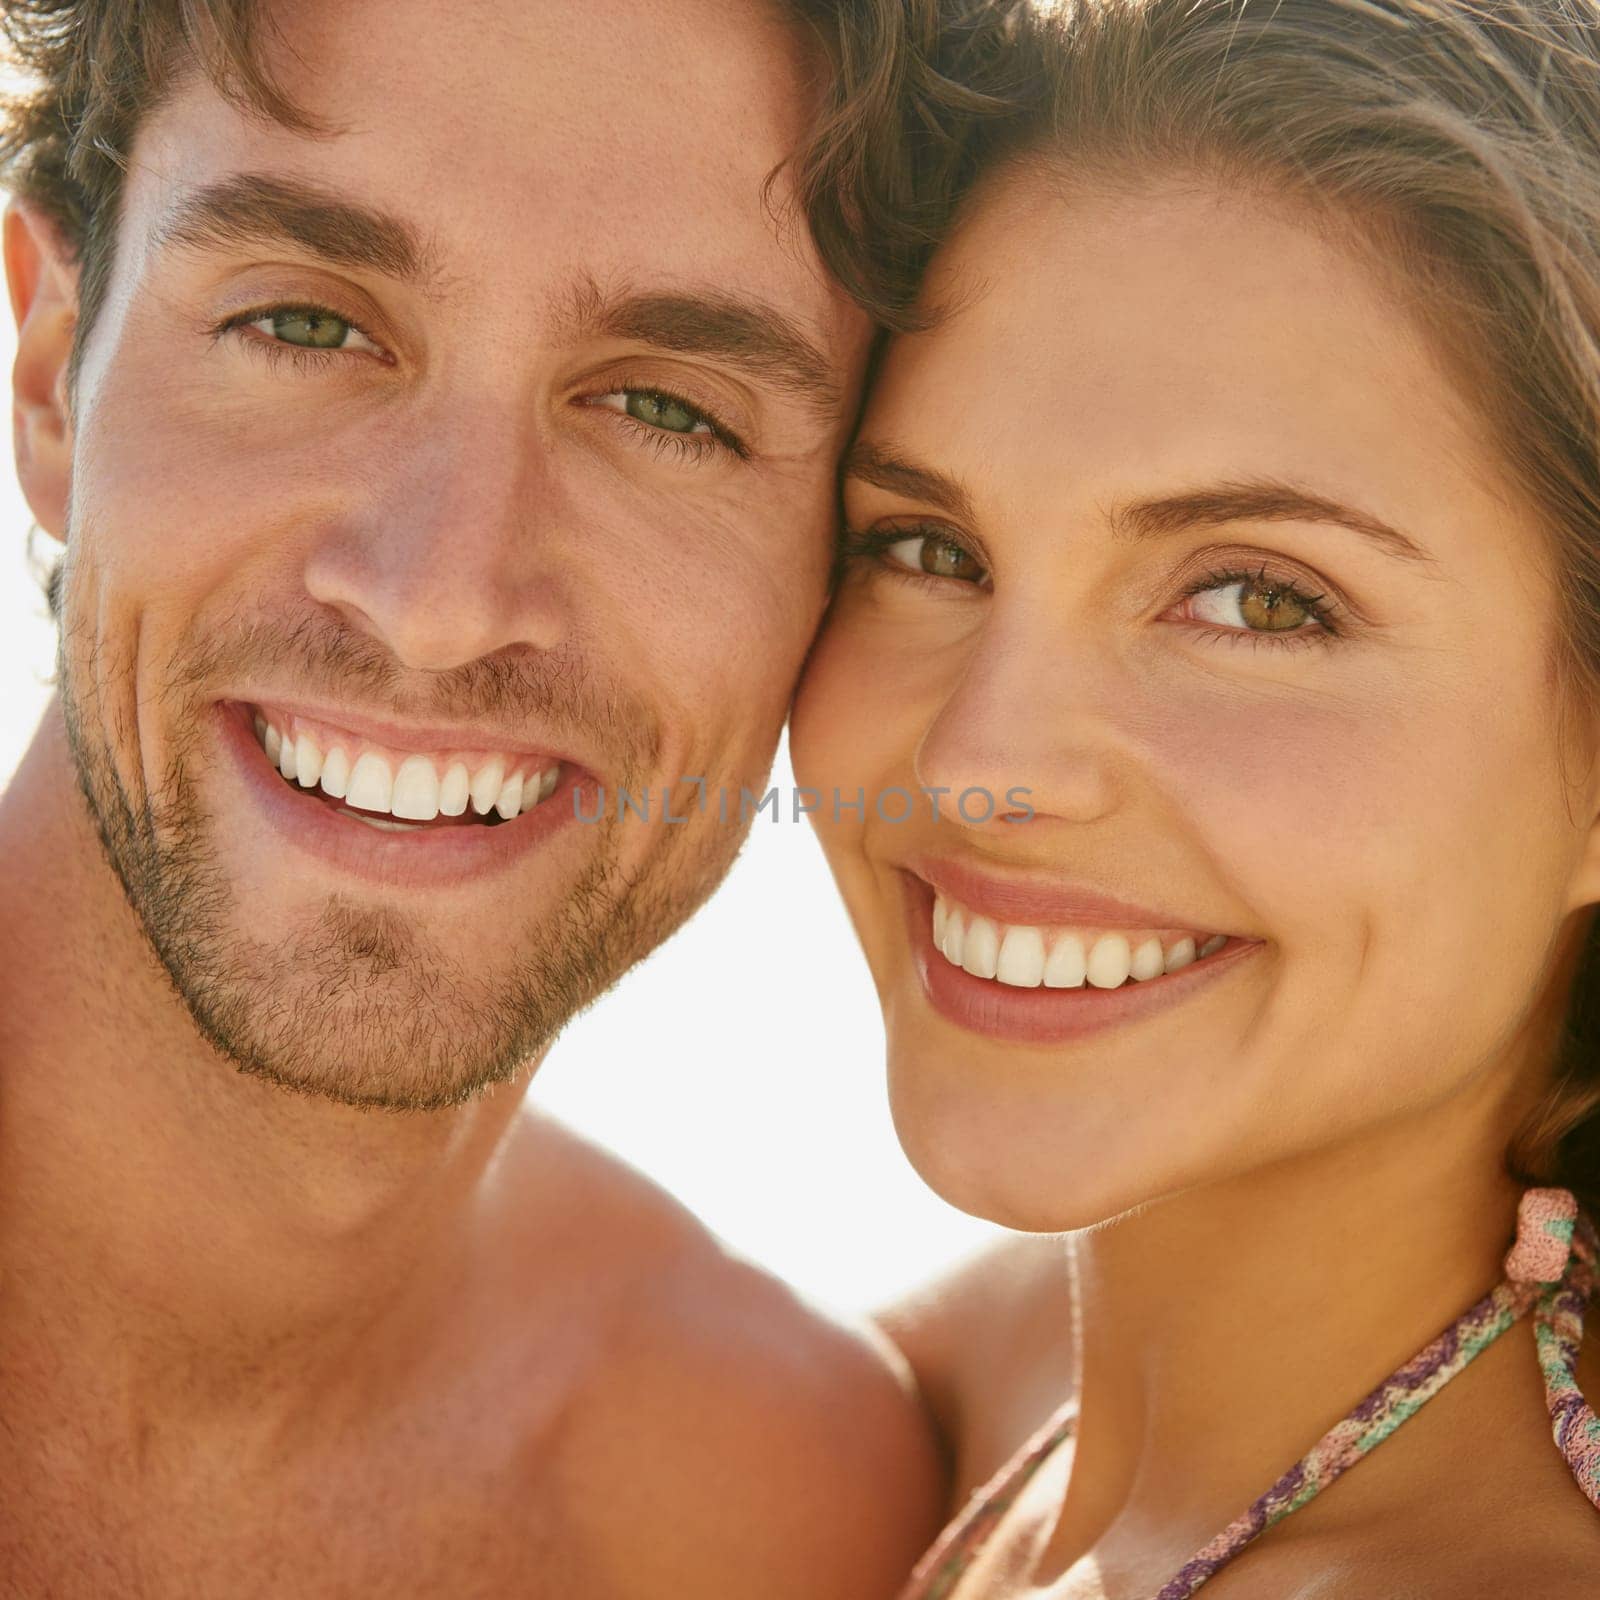 Love, portrait and happy couple hug at a beach for travel, vacation and bonding in nature together. Ocean, adventure and face of people at the sea with care, trust and support, smile and fun outdoor.